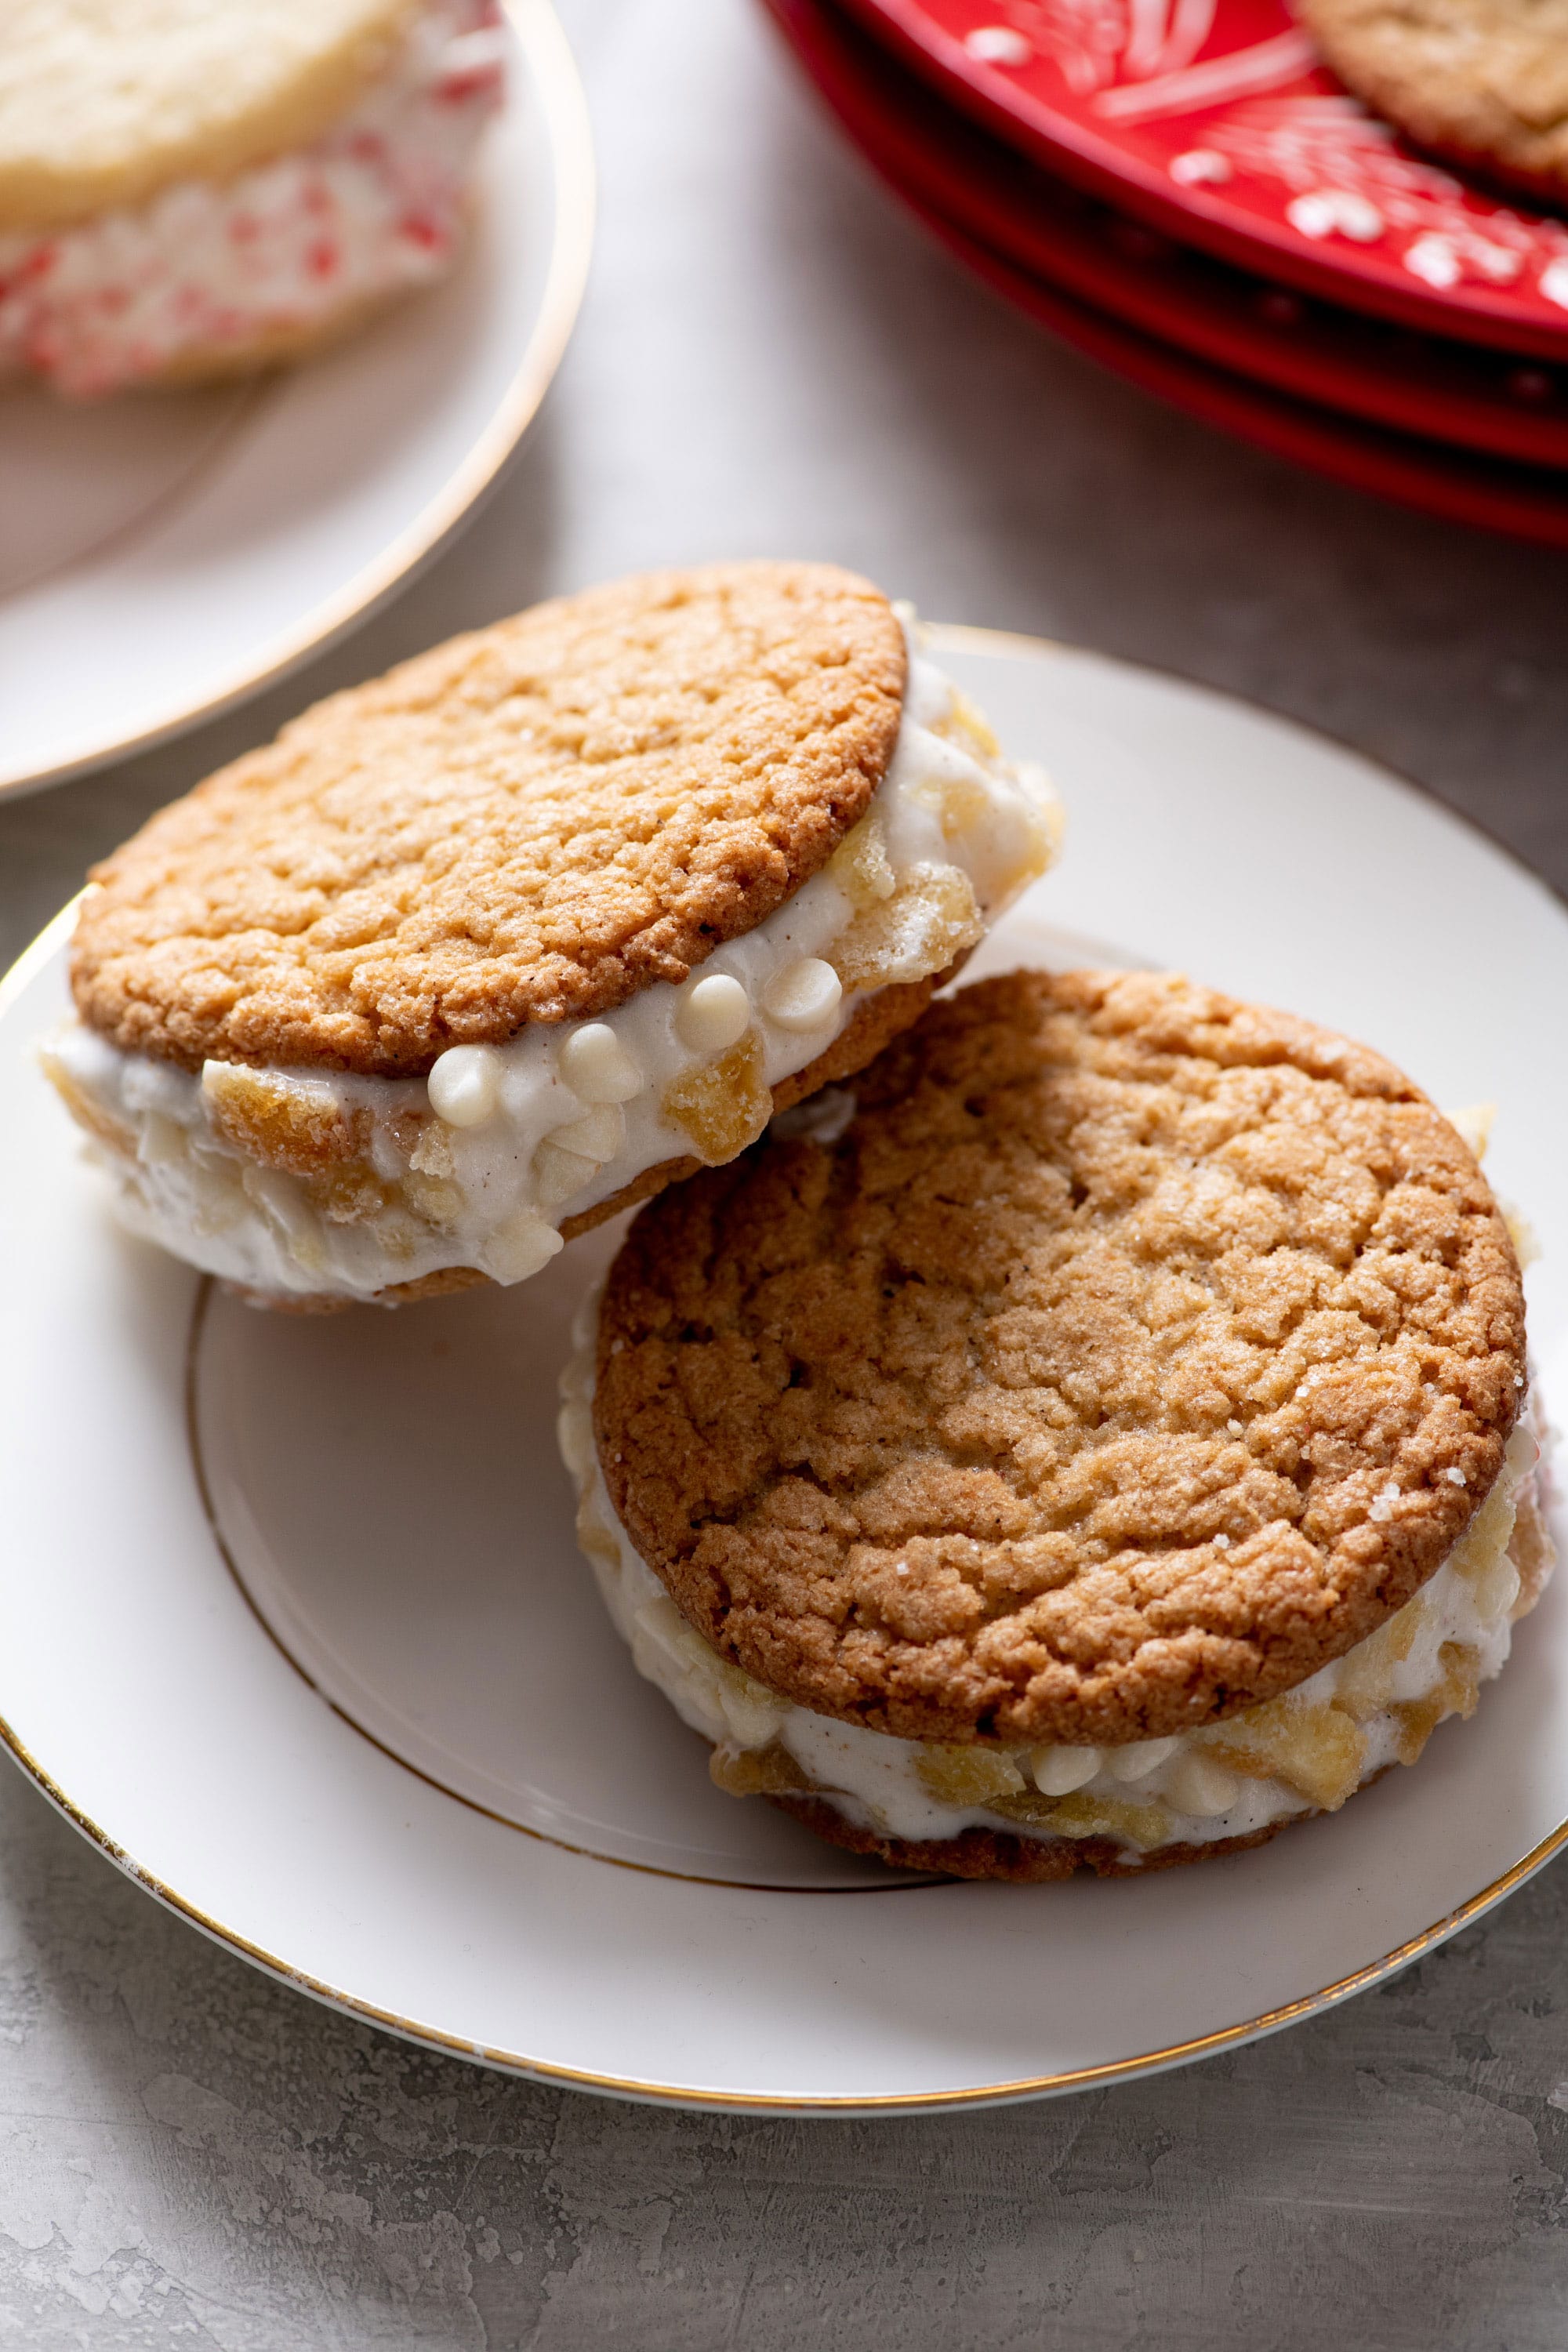 Two ice cream sandwiches on a plate.